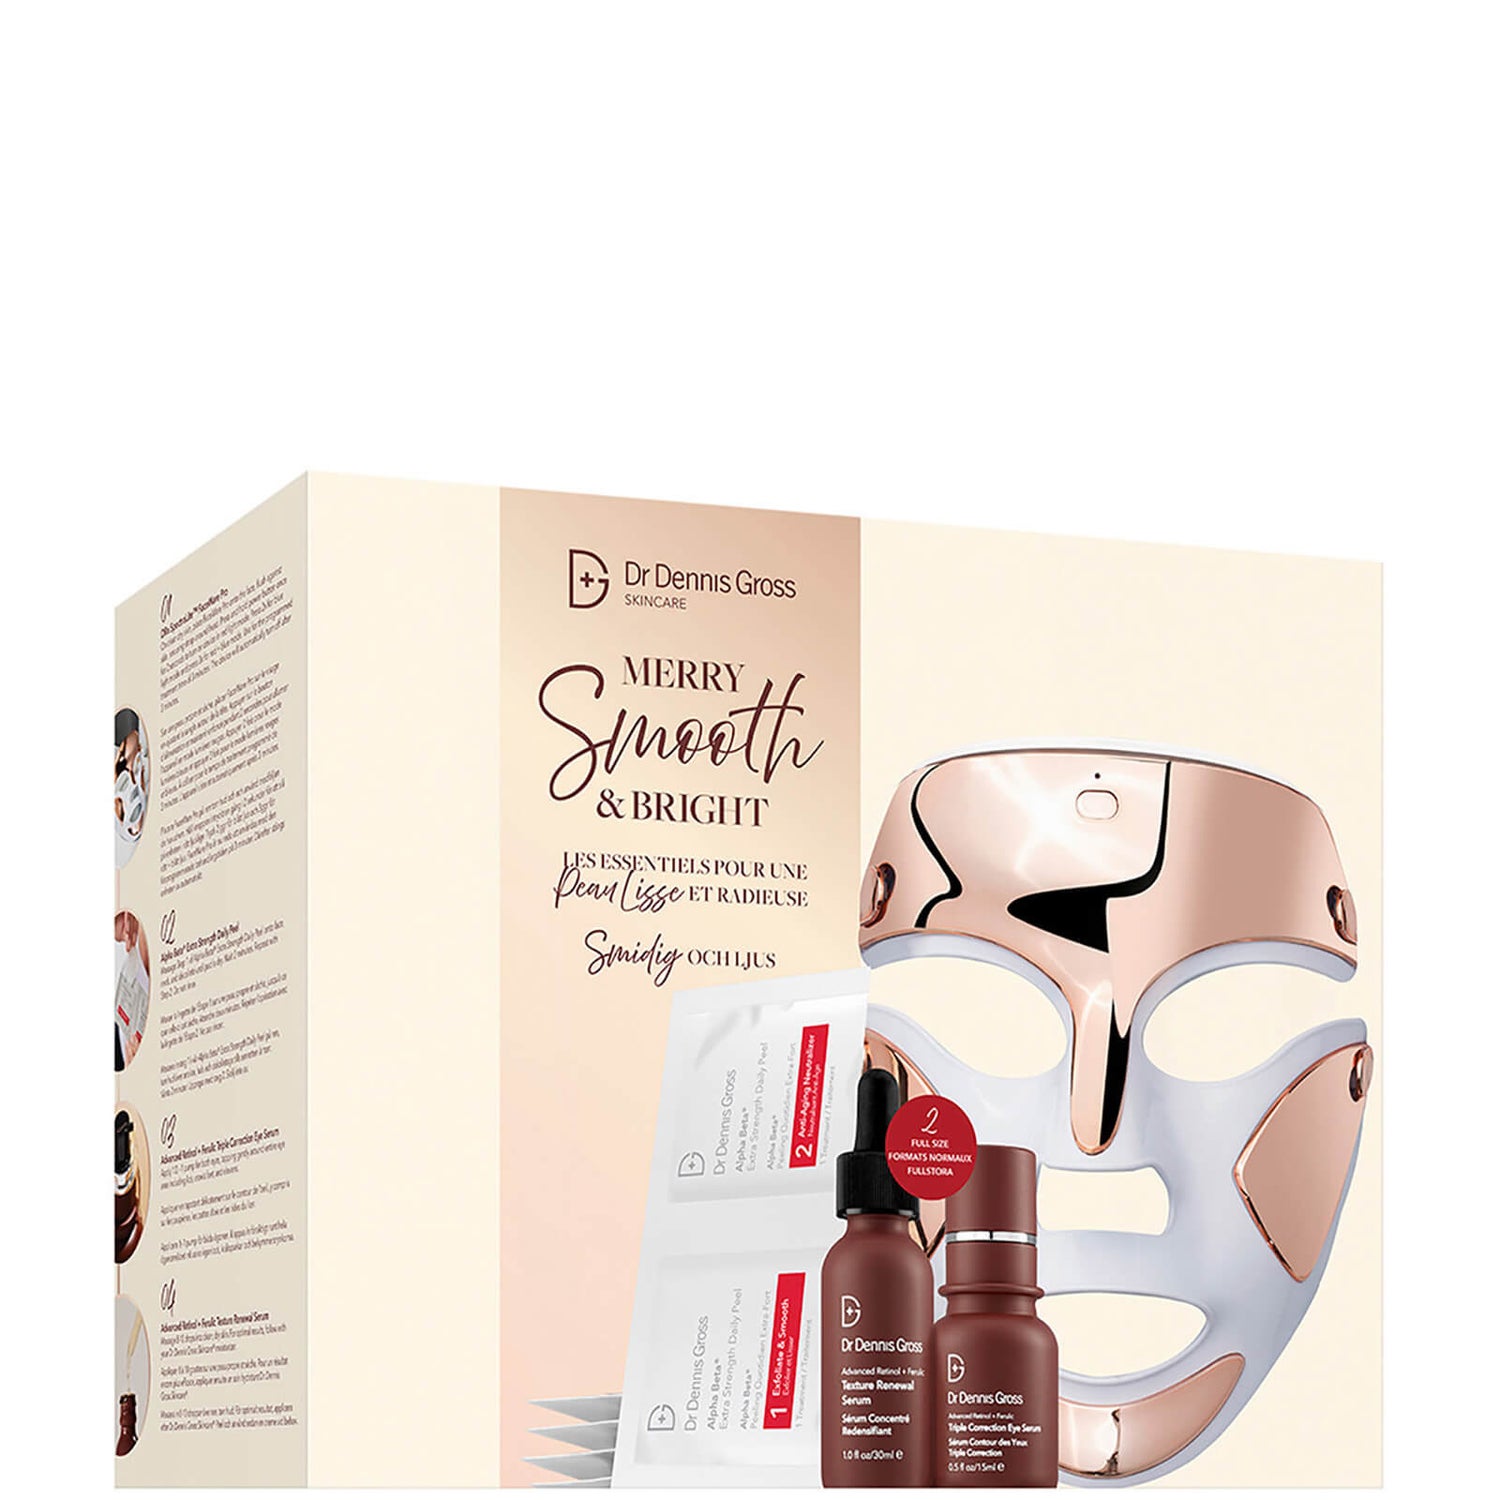 Dr Dennis Gross Skincare Merry, Smooth and Bright Set (Worth £593.00)